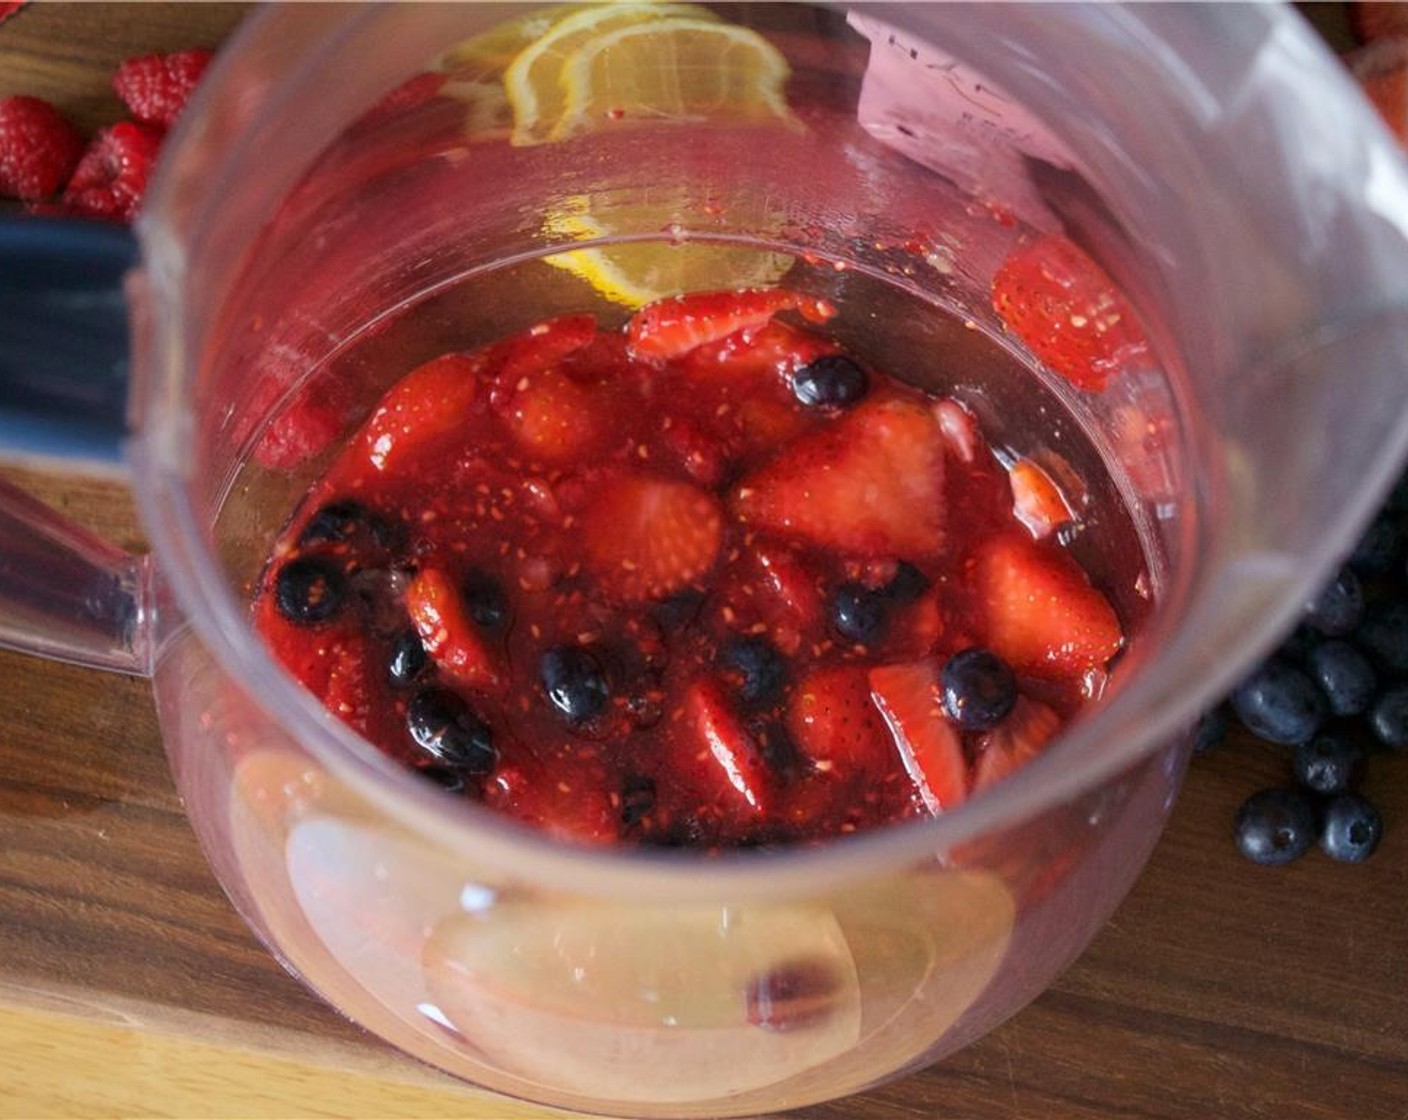 step 3 In a large pitcher, add half of the raspberries, blueberries and strawberries, along with the juice and sugar. Muddle until completely broken down.